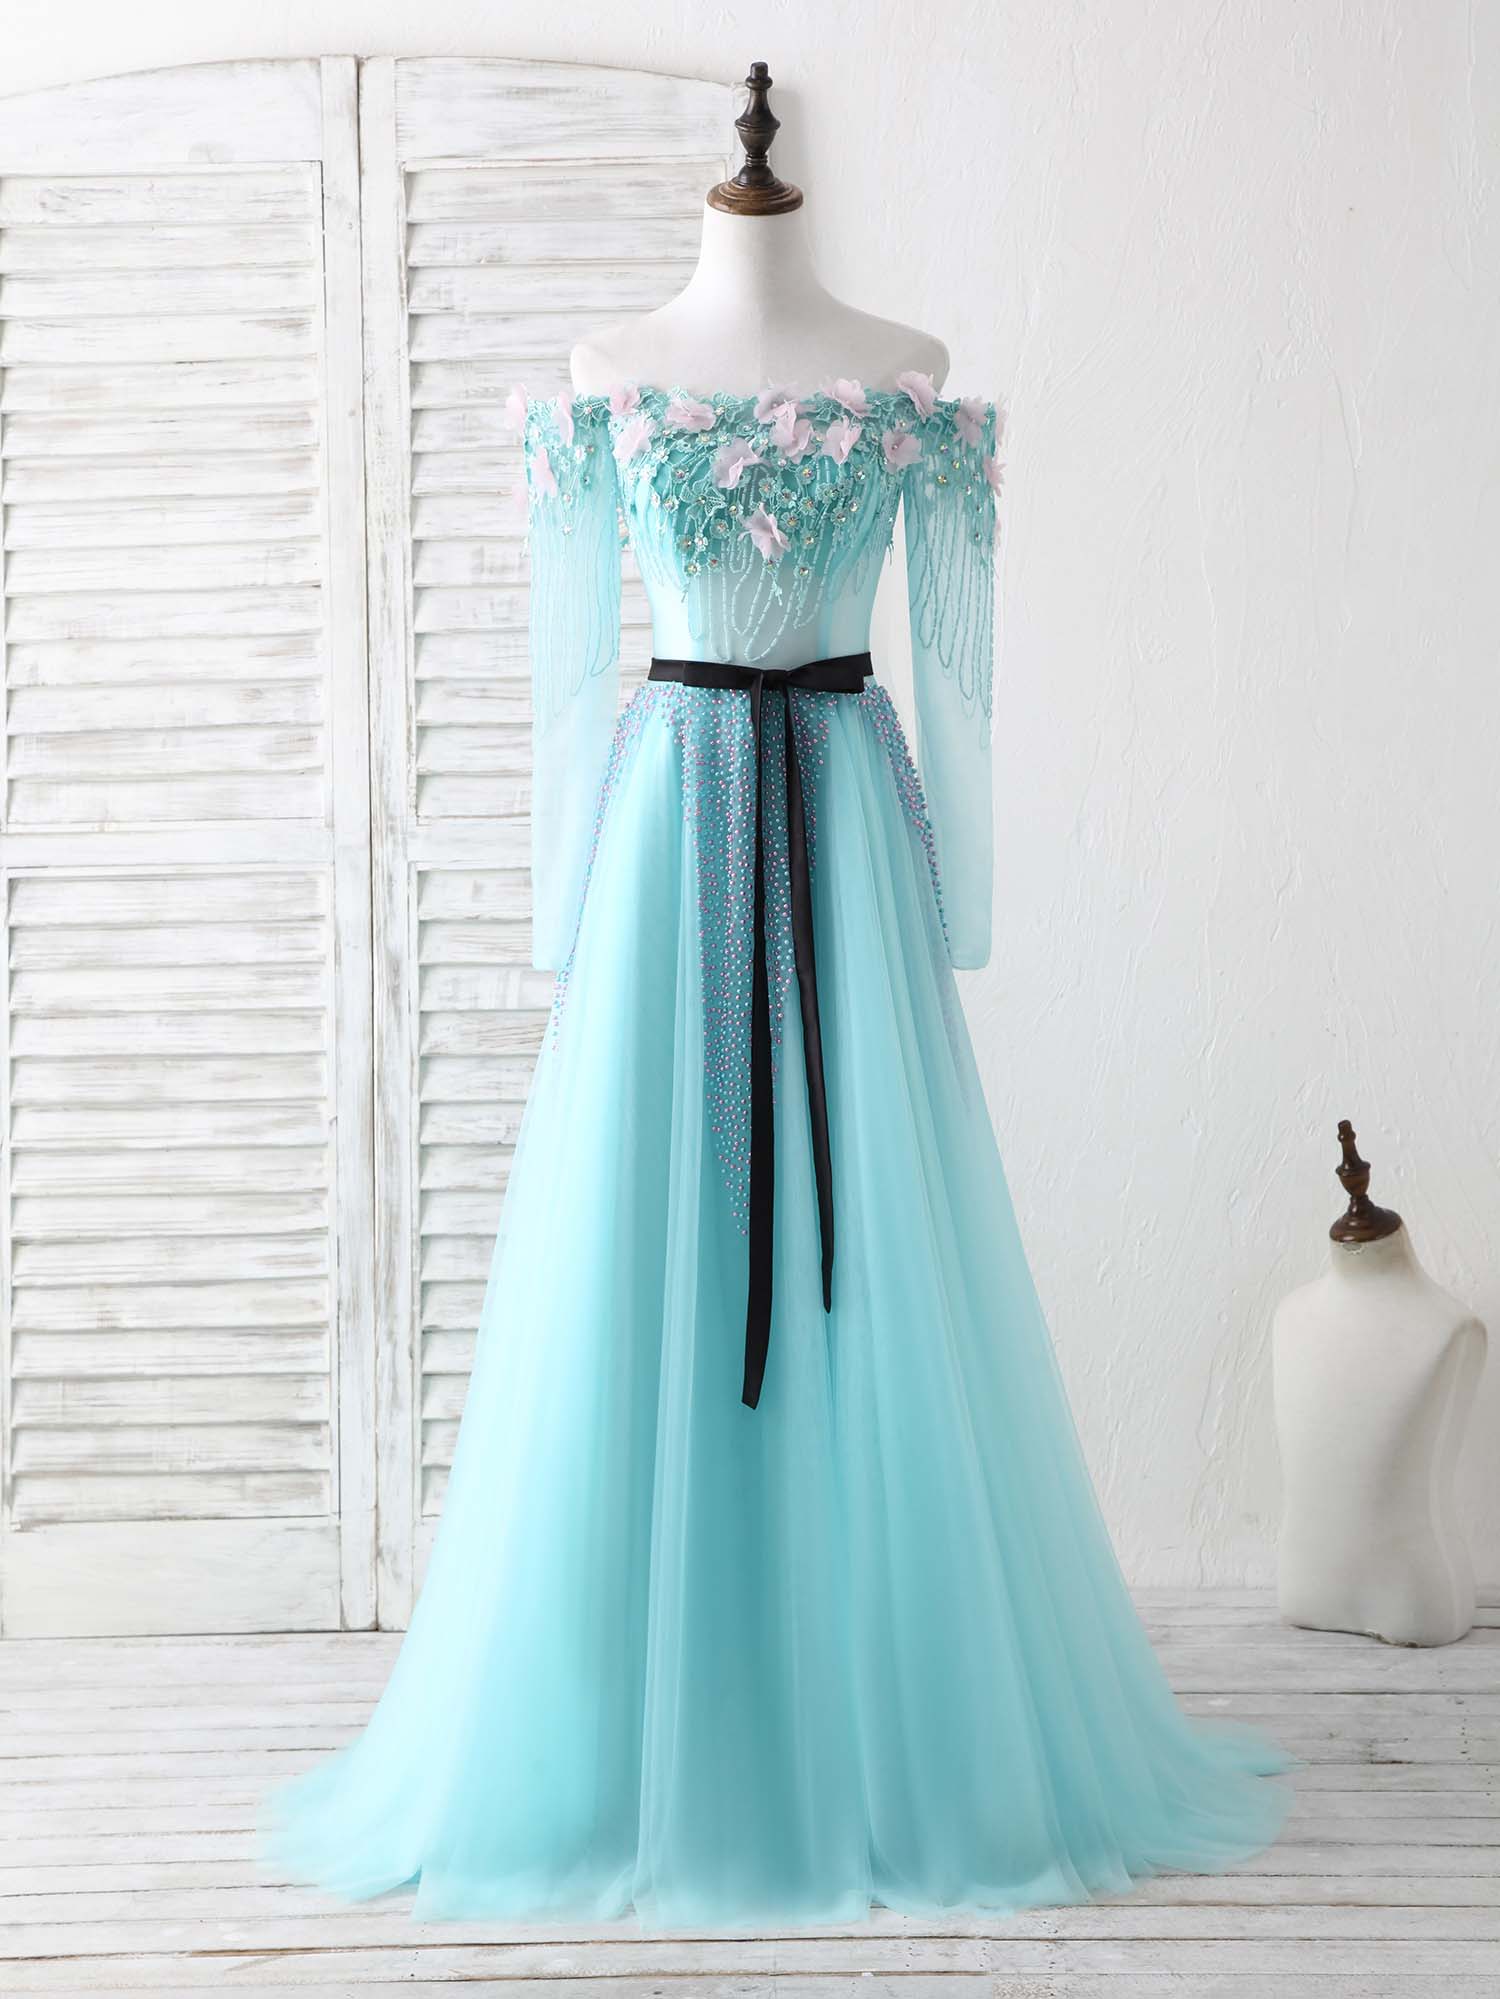 Blue Tulle Beads Long Corset Prom Dress Blue Beads Evening Dress outfit, Bridesmaid Dresses Uk